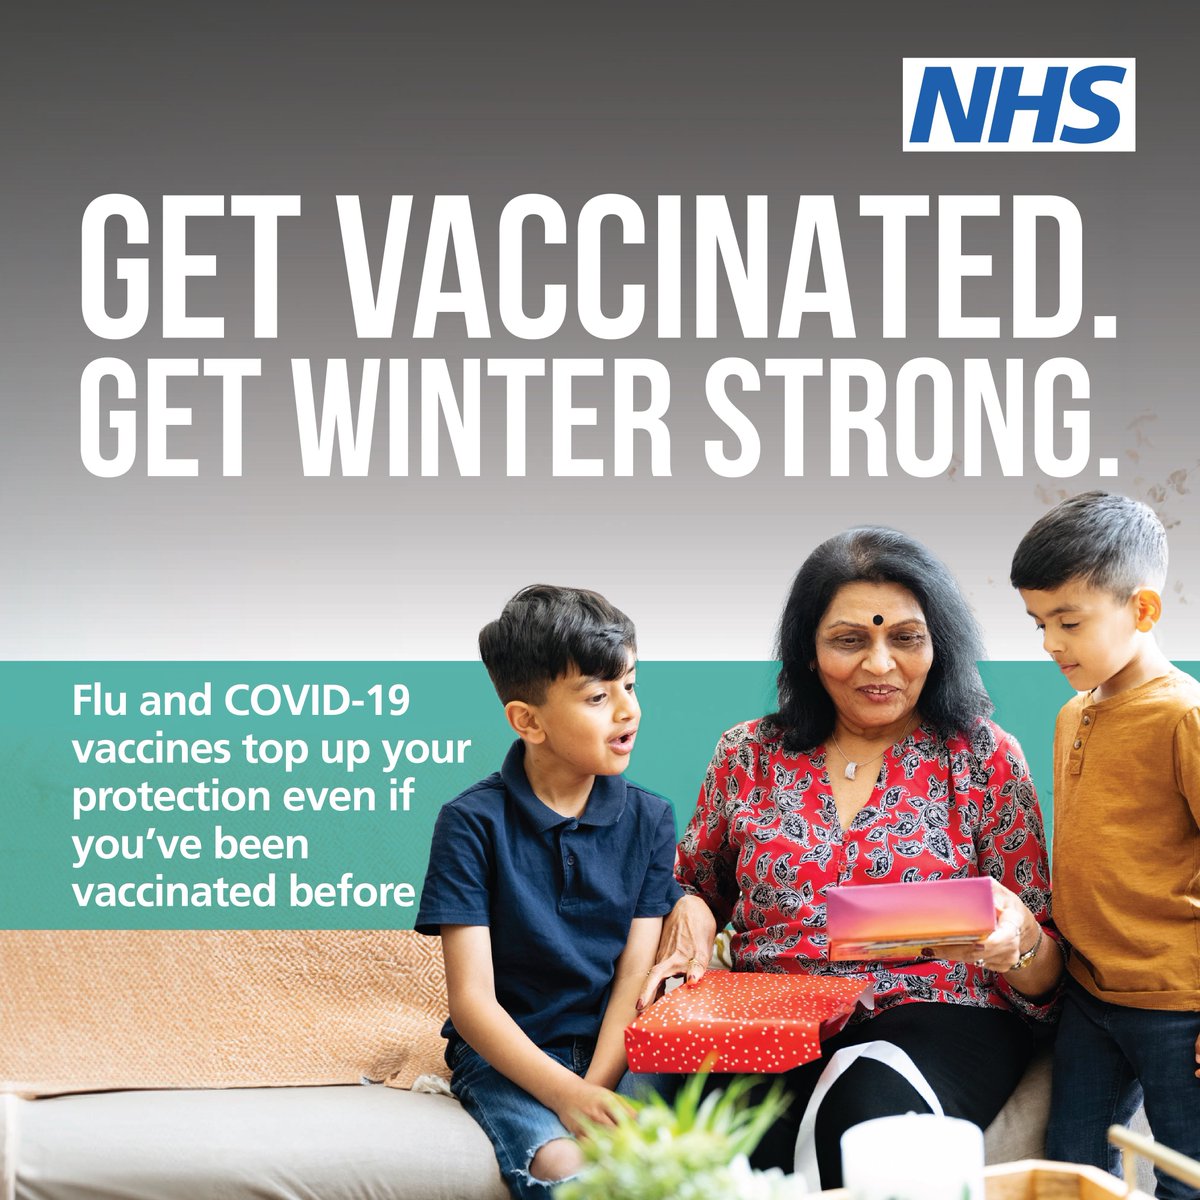 Immunity from previous flu and COVID-19 vaccines fades, and the viruses change over time. Top up your protection — even if you’ve had flu or COVID-19 or have been vaccinated before. Check if you’re eligible and book now. buff.ly/3EQo1Dw